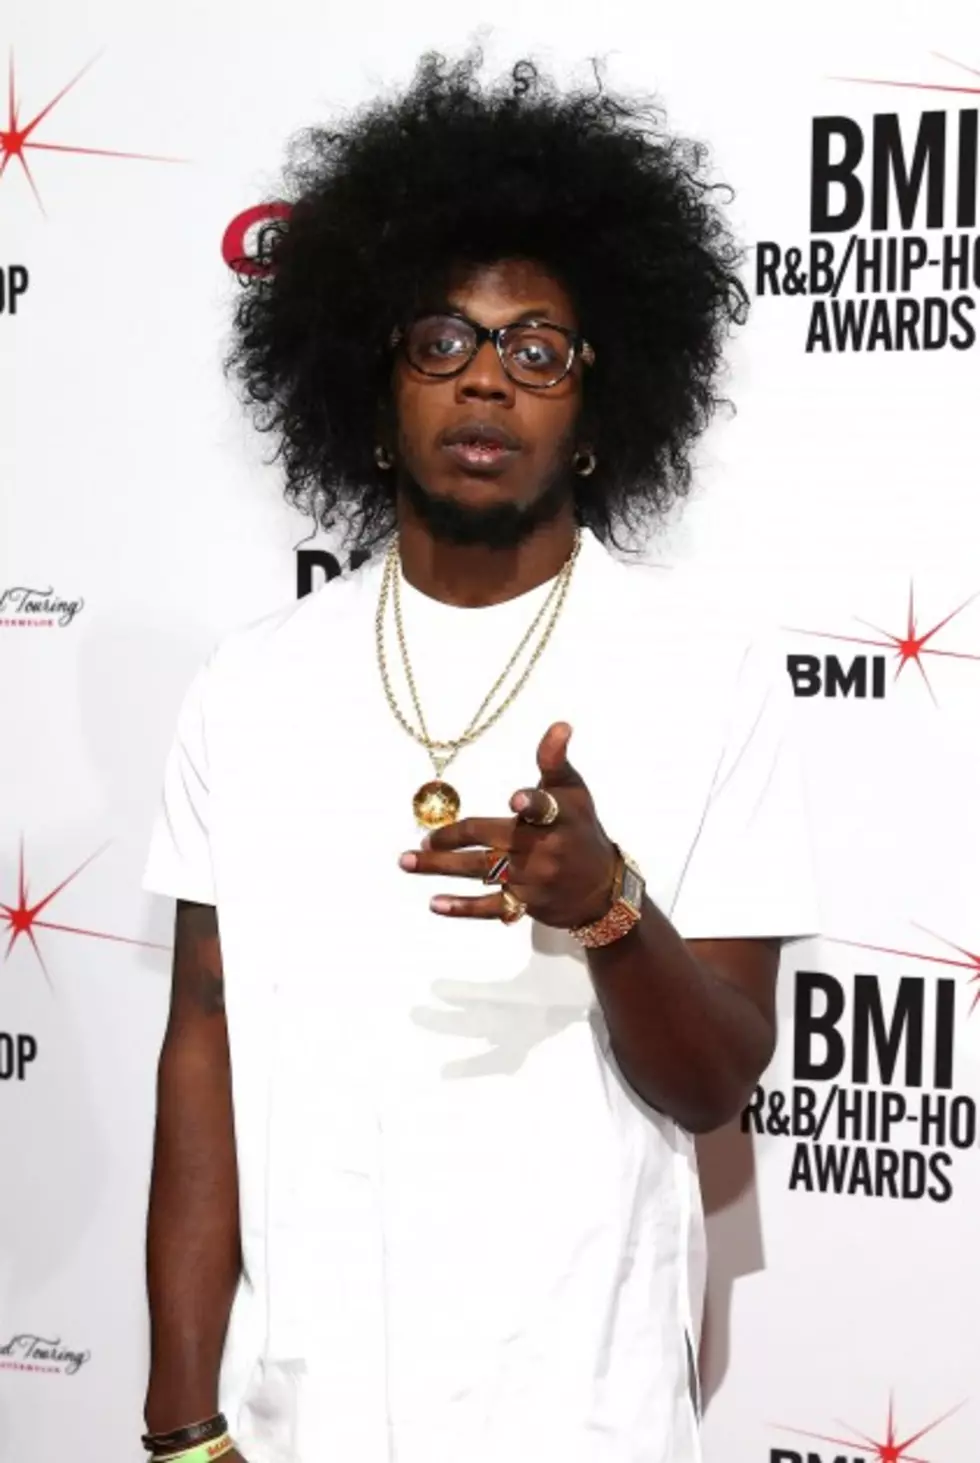 Trinidad James Calls In To The Afternoon Jumpoff To Talk About Concert And More [AUDIO, VIDEO]